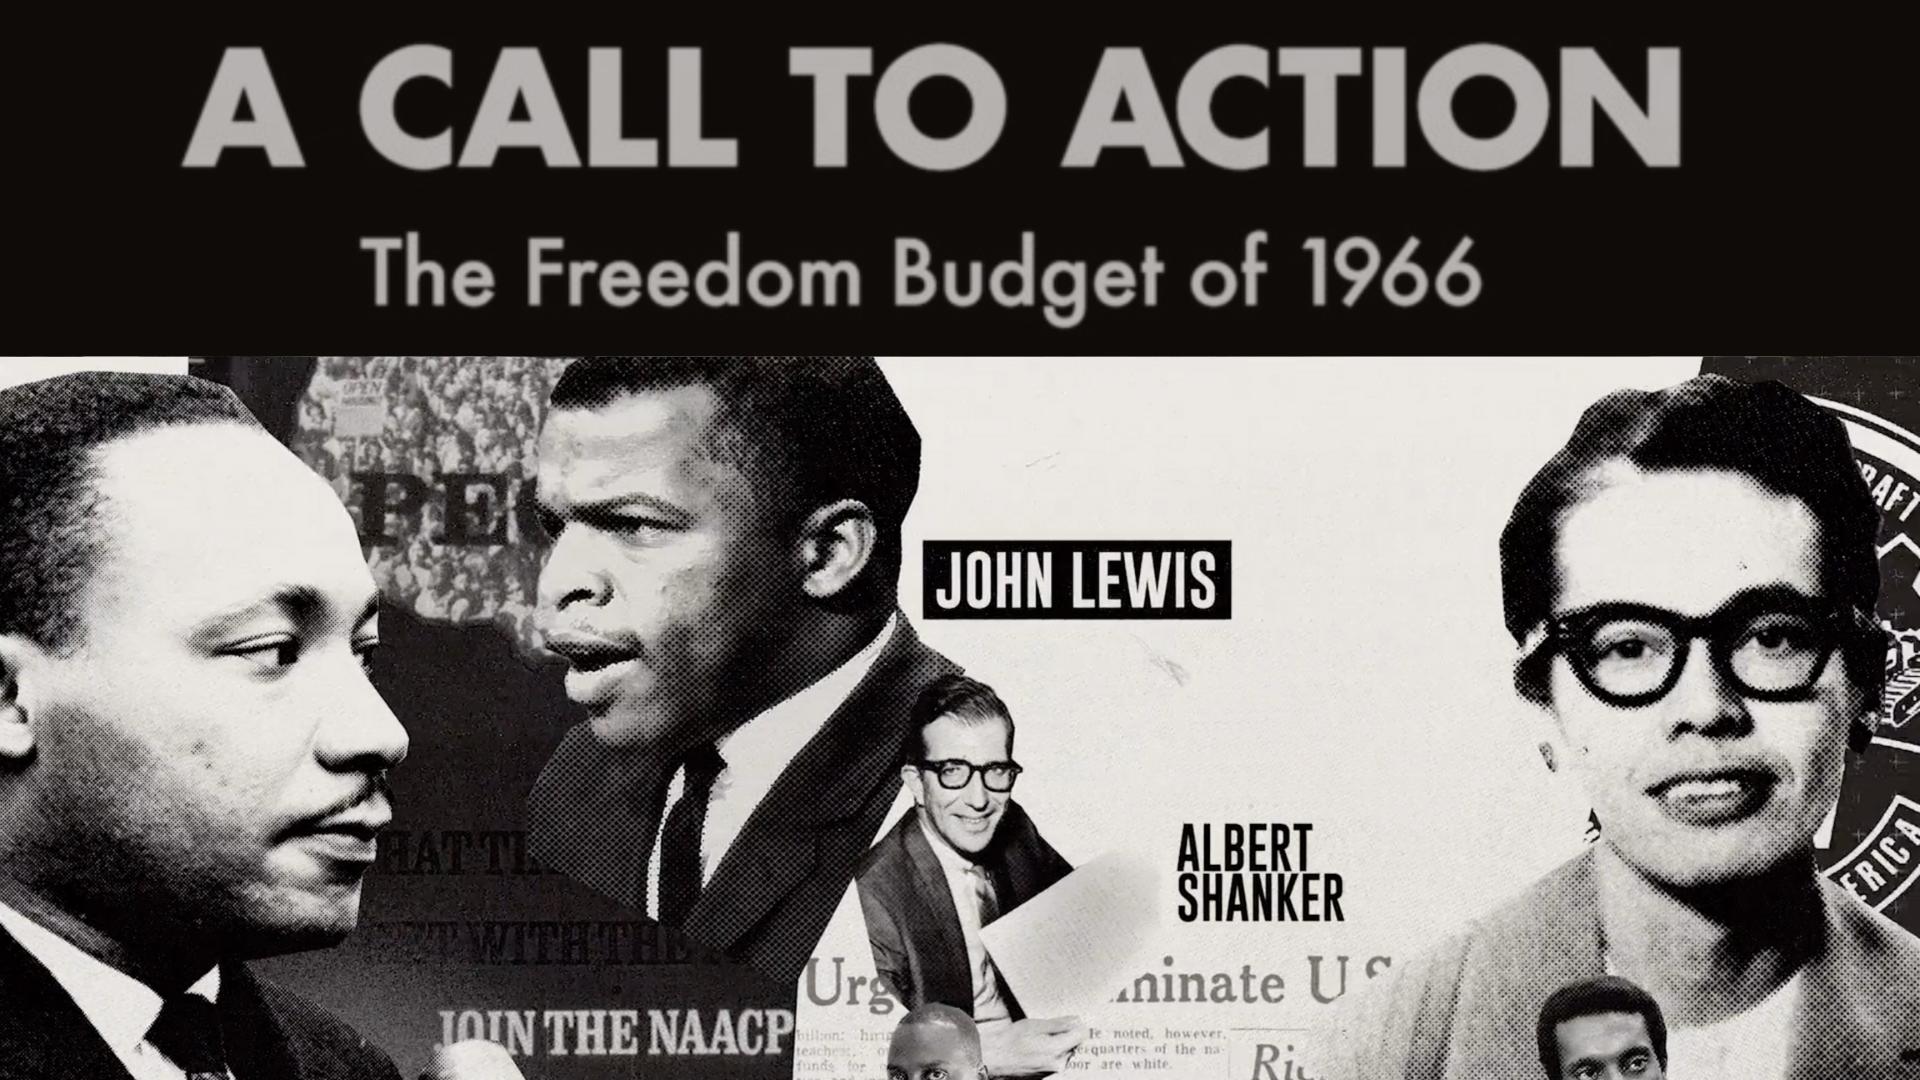 A Call to Action: The Freedom Budget of 1966